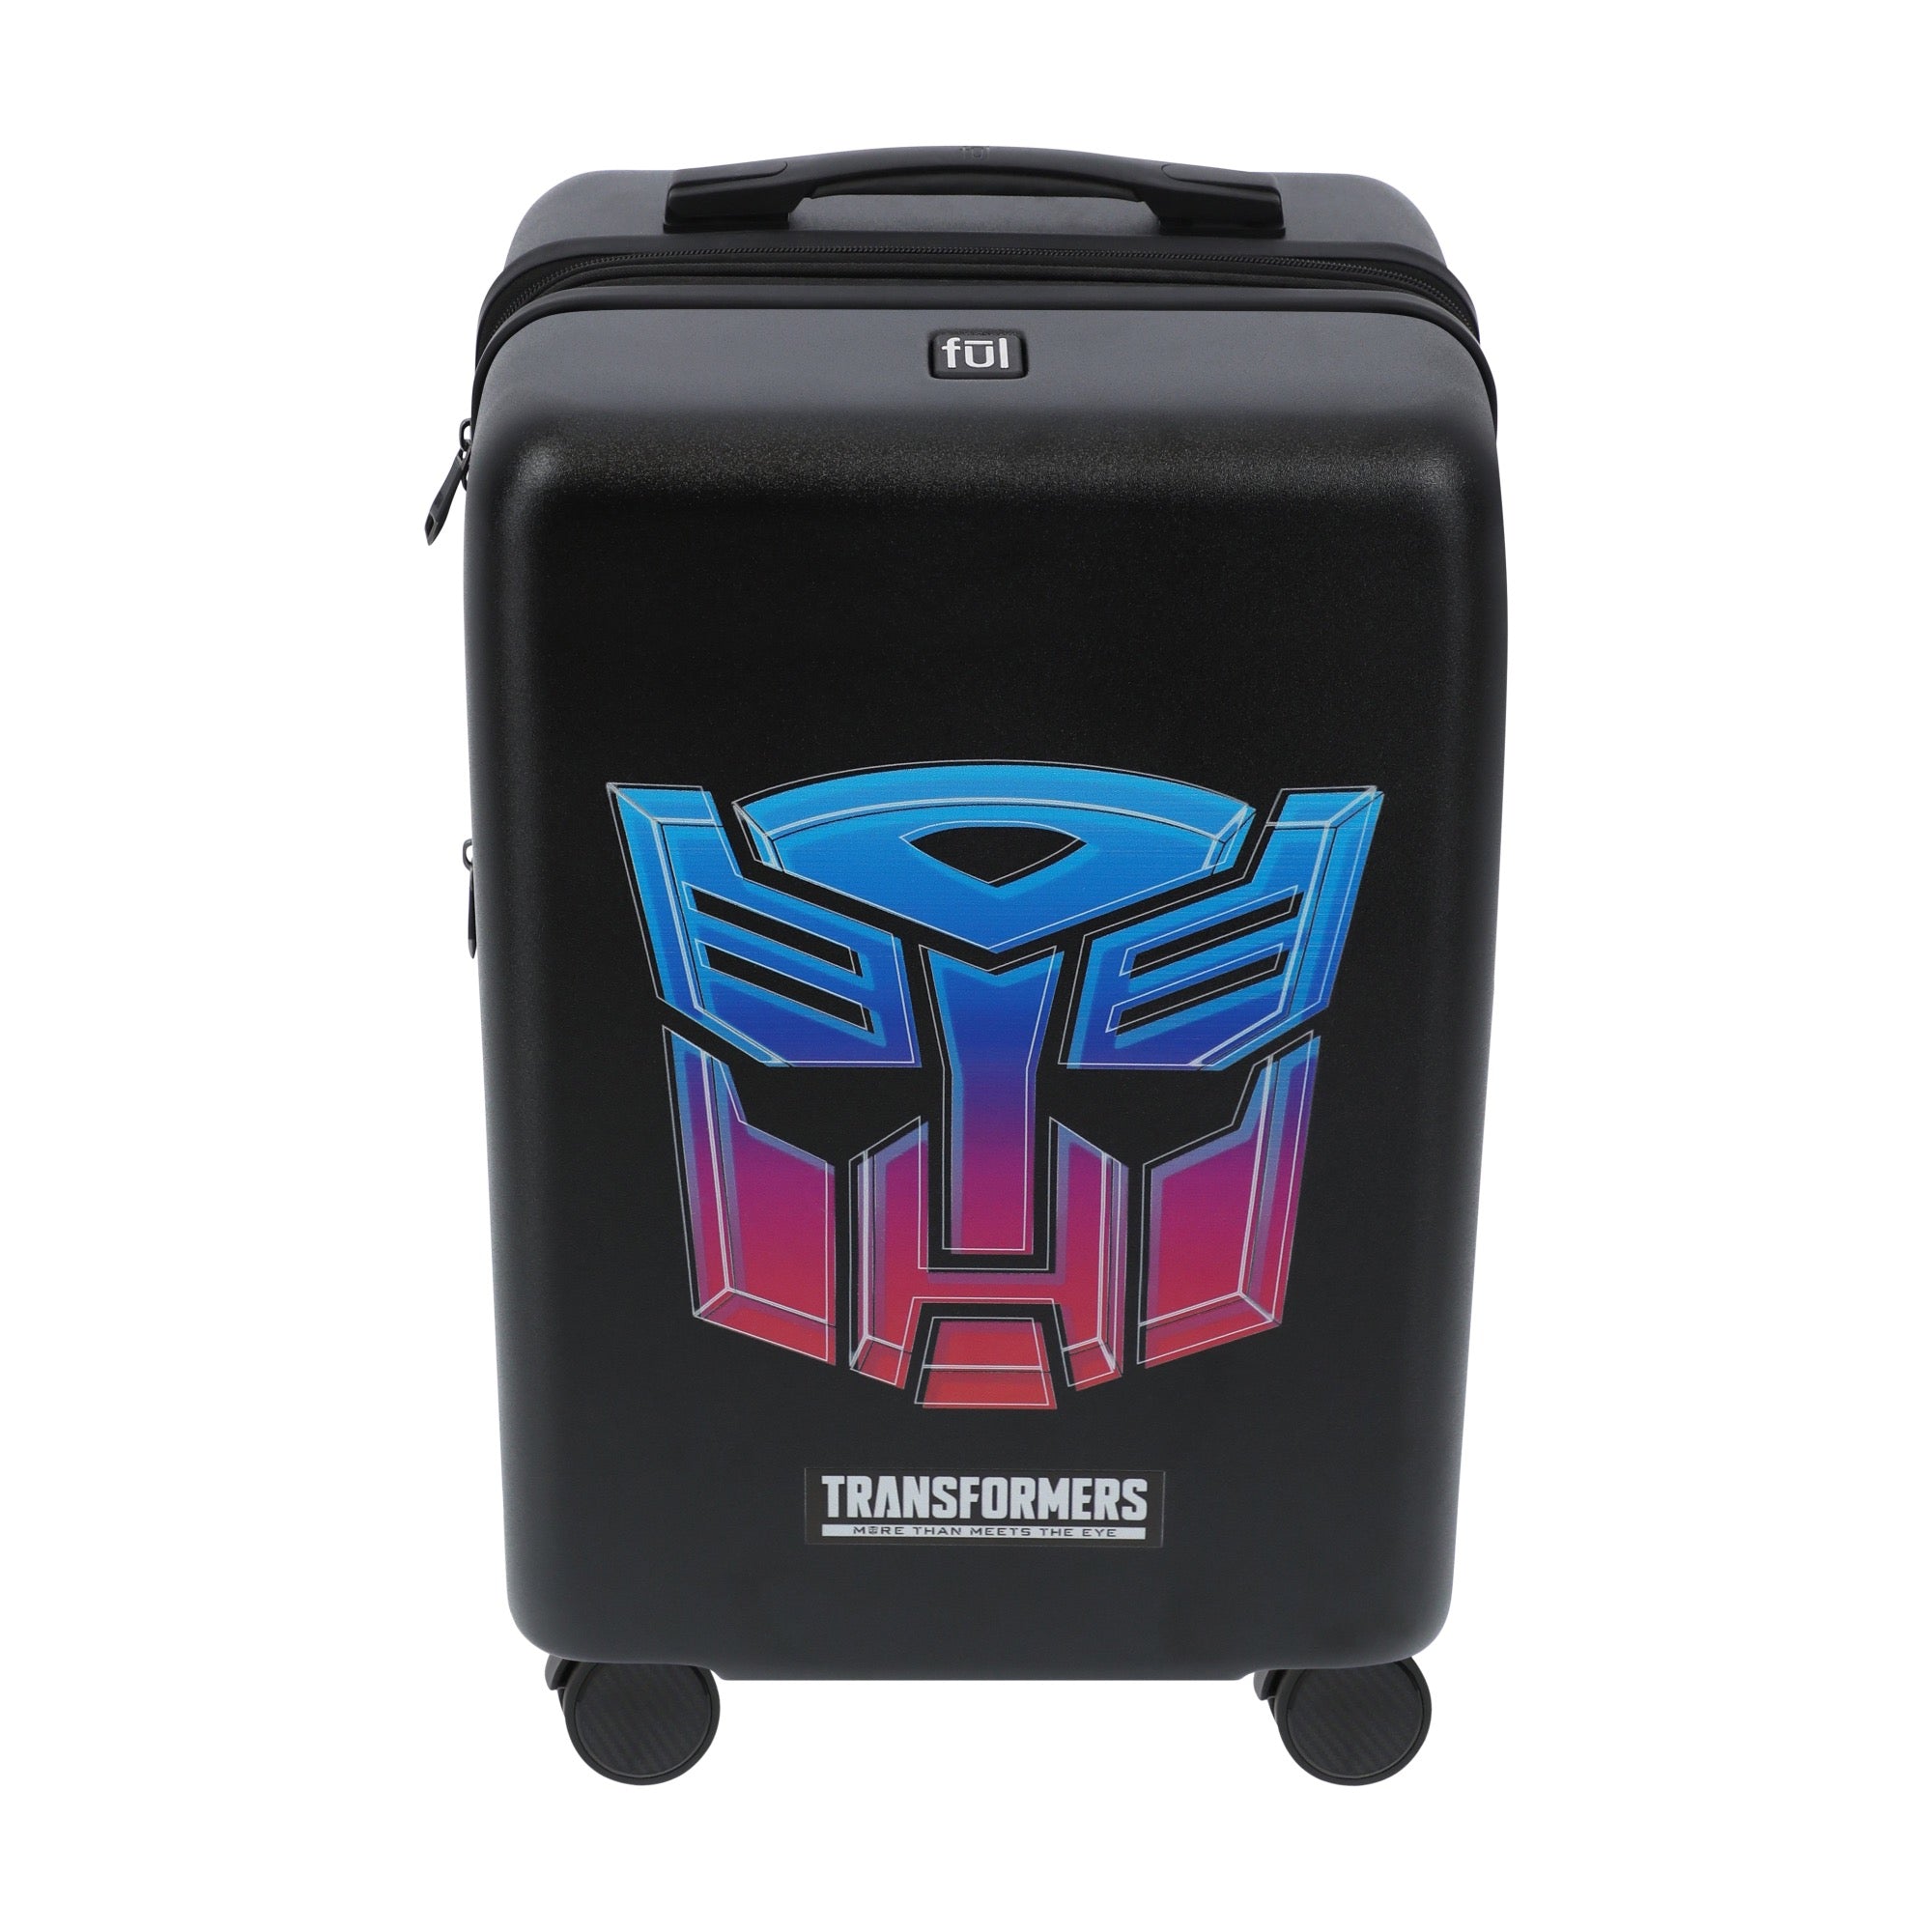 Black hasbro transformers 22.5" carry-on spinner suitcase luggage by Ful